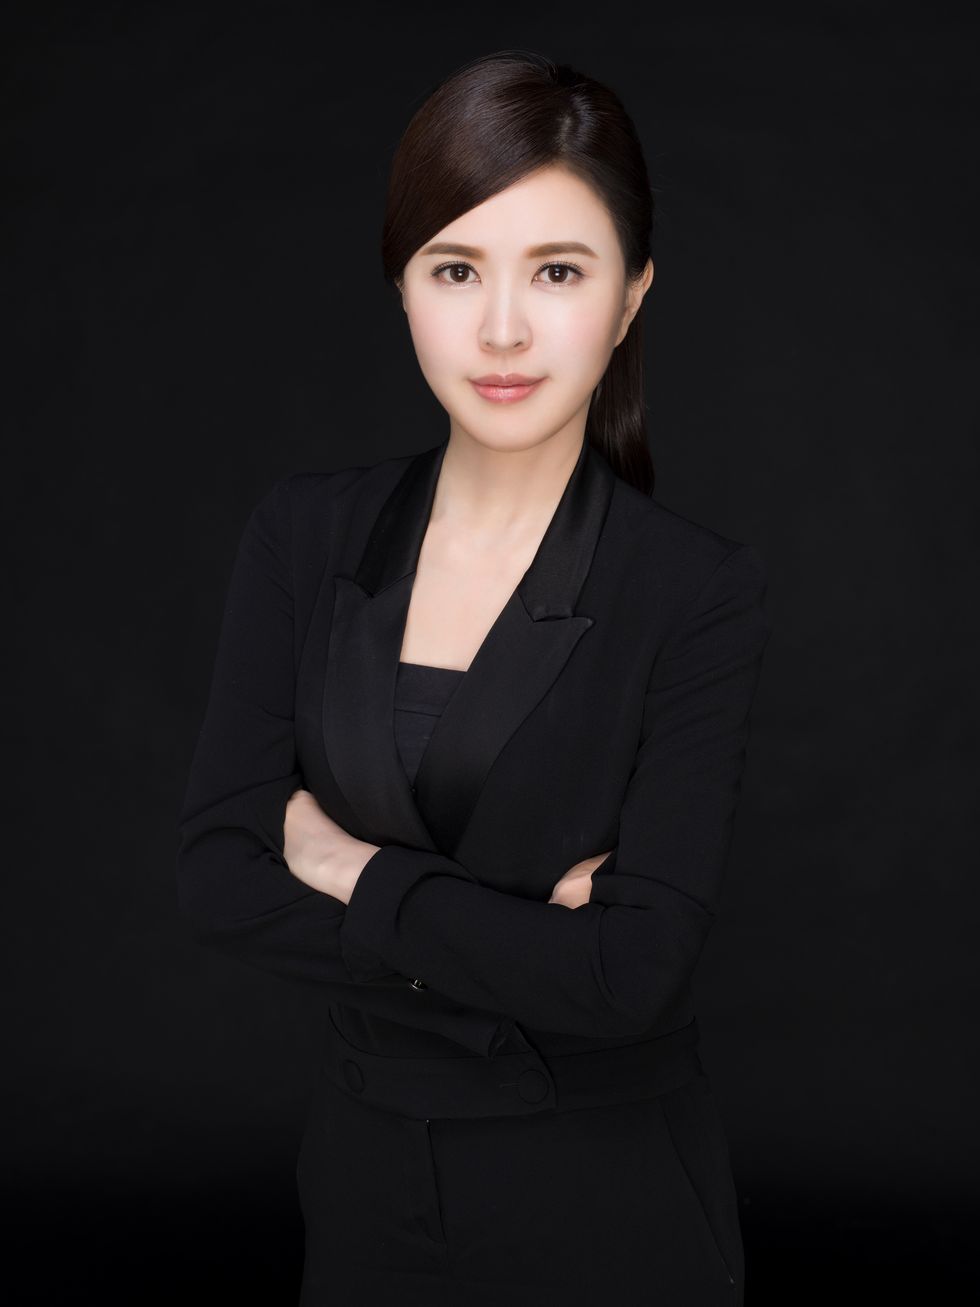 Face, Beauty, Chin, Forehead, Portrait, Formal wear, Photography, Suit, White-collar worker, Outerwear, 